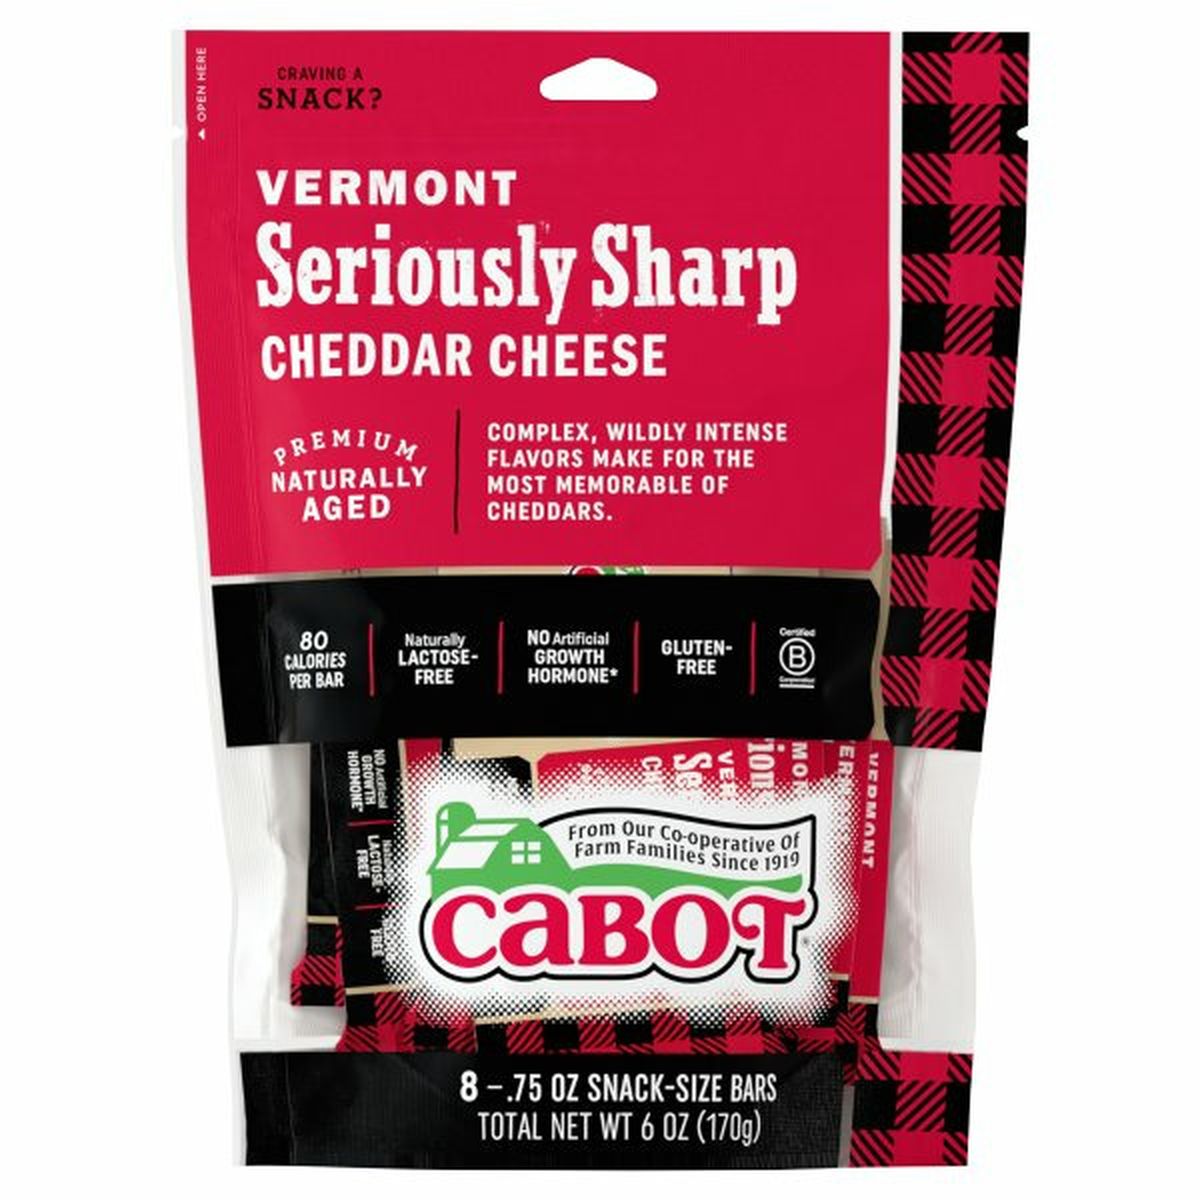 Calories in Cabot Cheese, Vermont Seriously Sharp Cheddar, 8 Pack